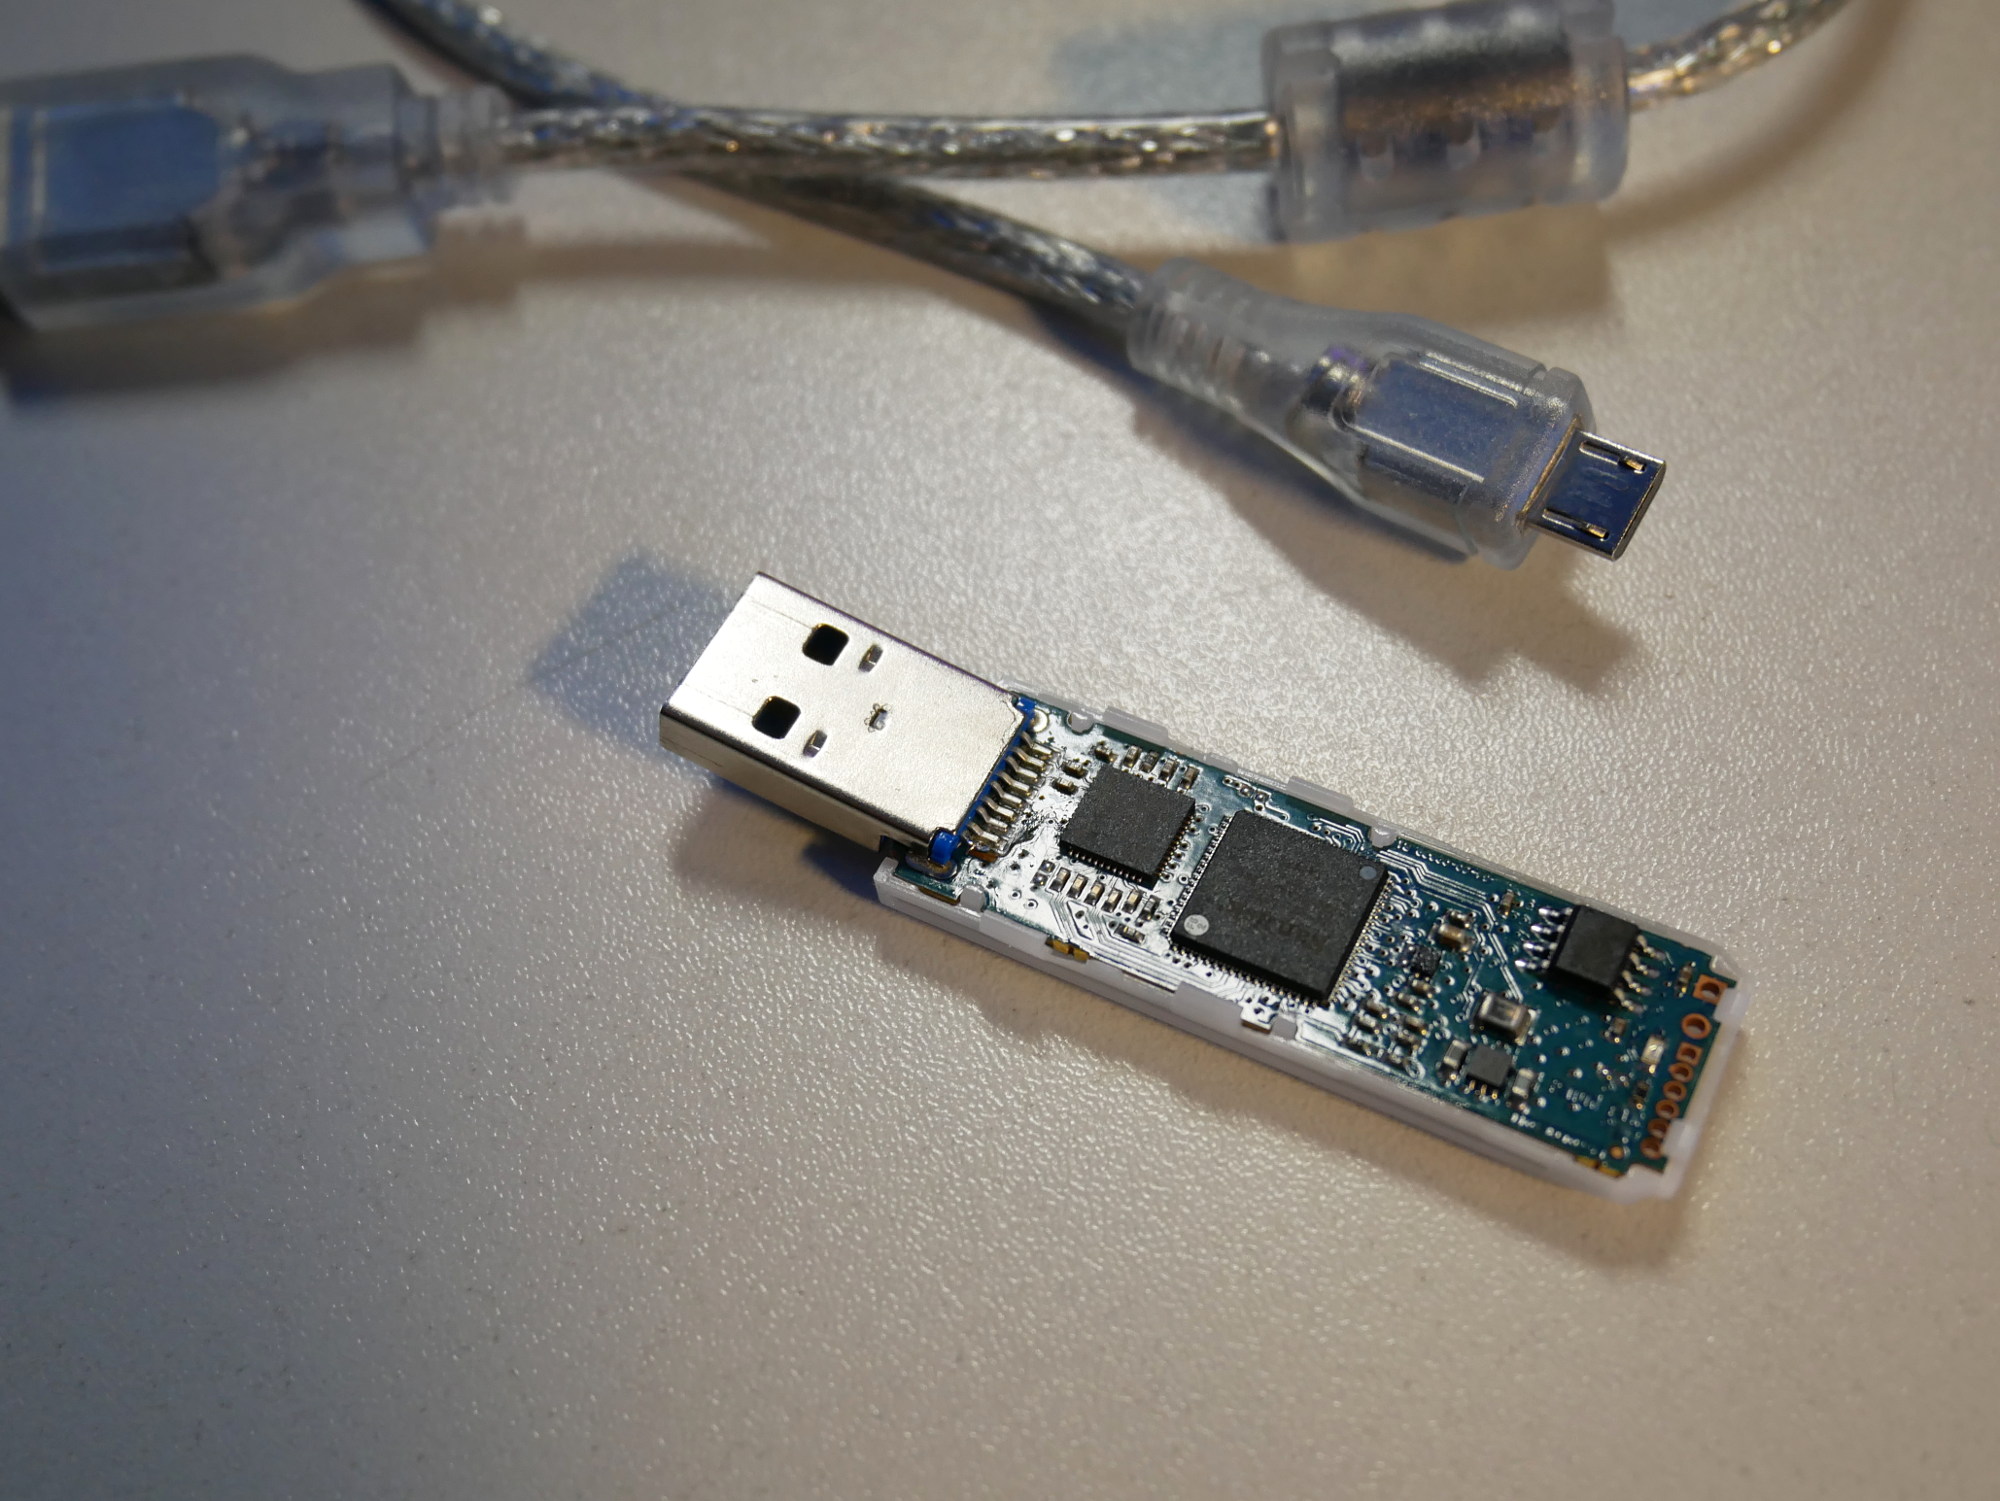 Picture of the USB stick with the fix in place